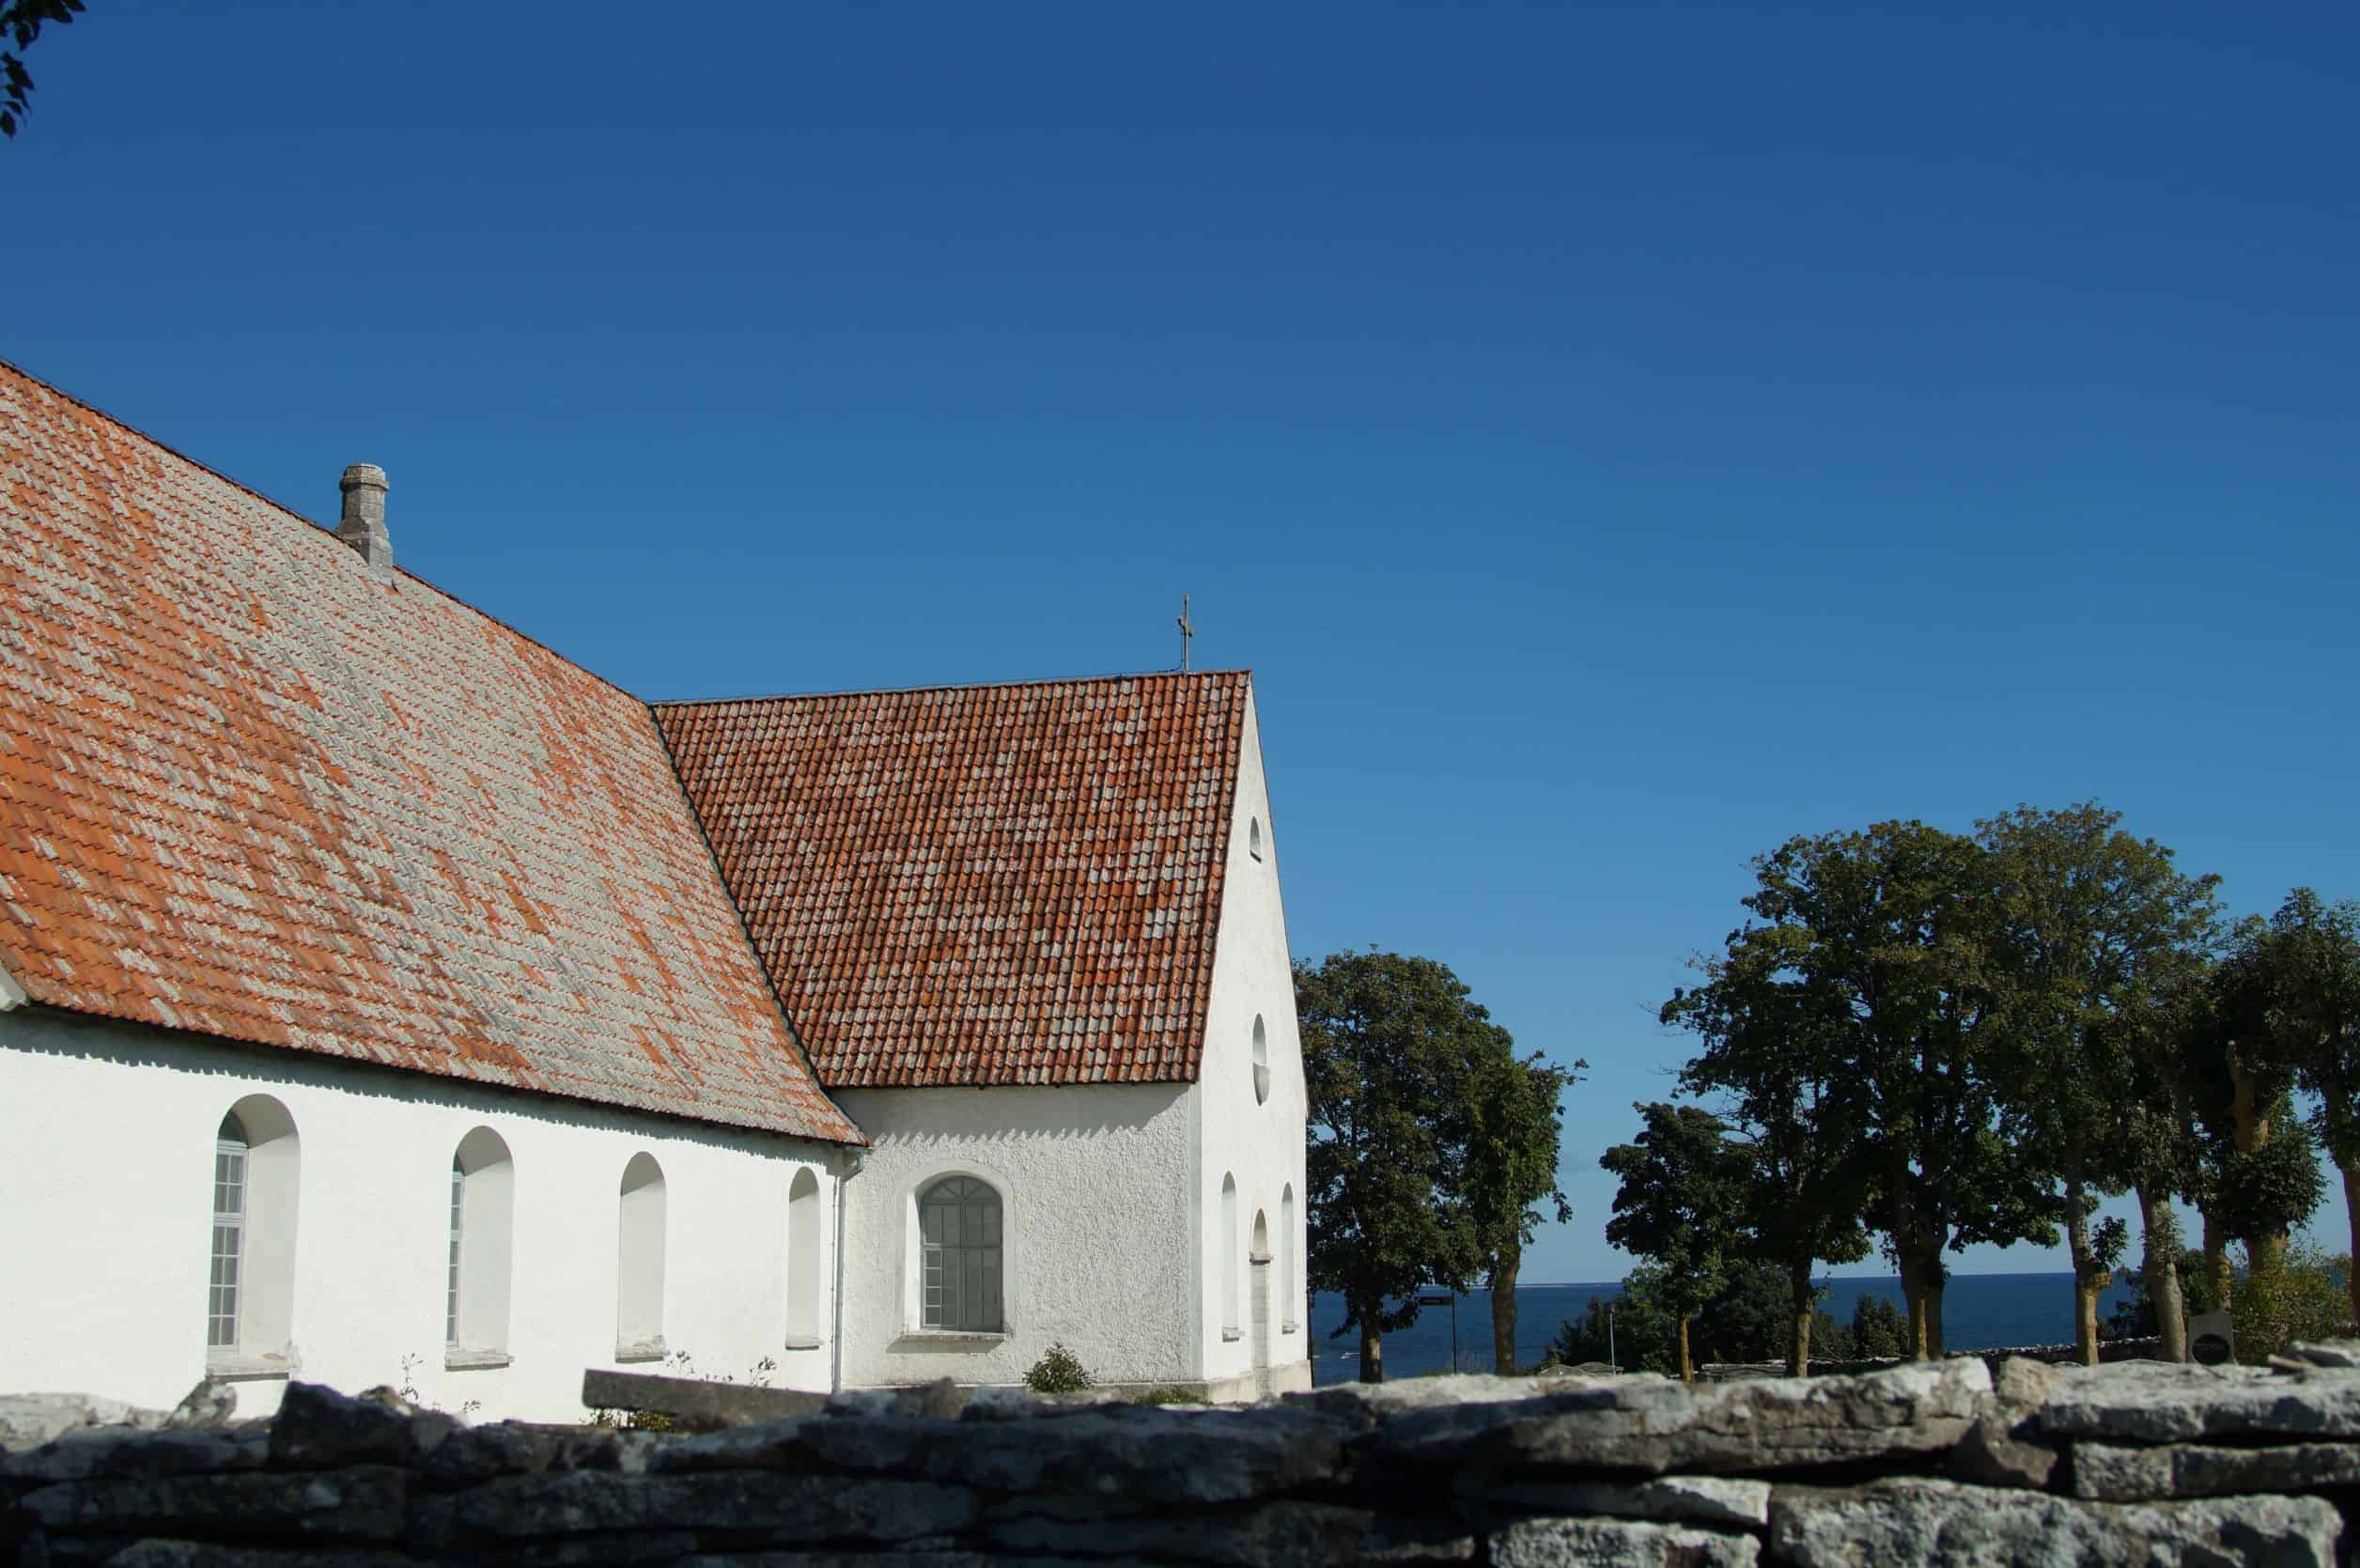 Image of a church building with some trees and the sea in the background